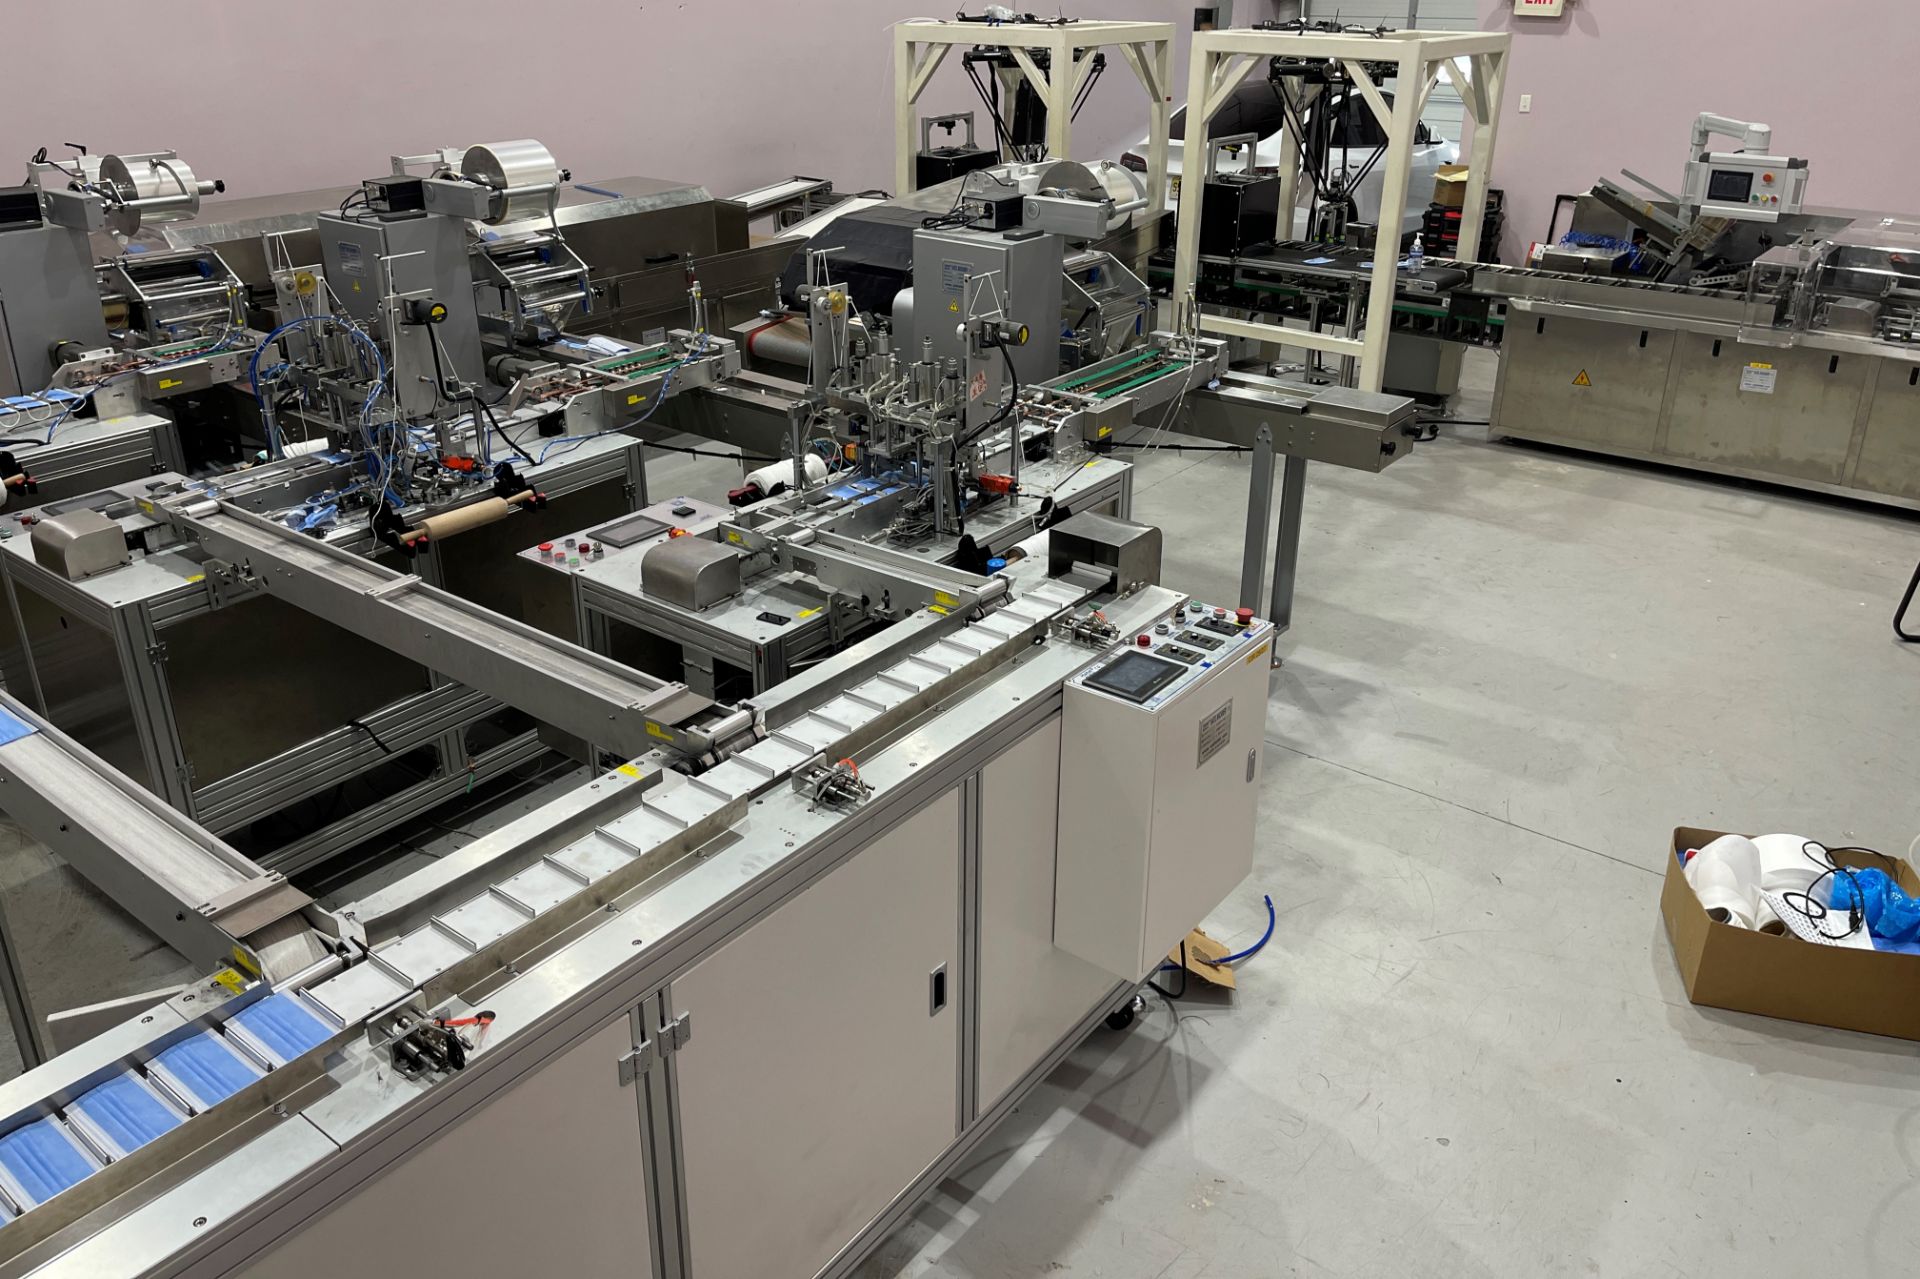 COMPLETE PACKAGE: 2020 3-Ply Disposable Medical Mask Assembly & Packaging Line Equipment, Includes: - Image 3 of 150